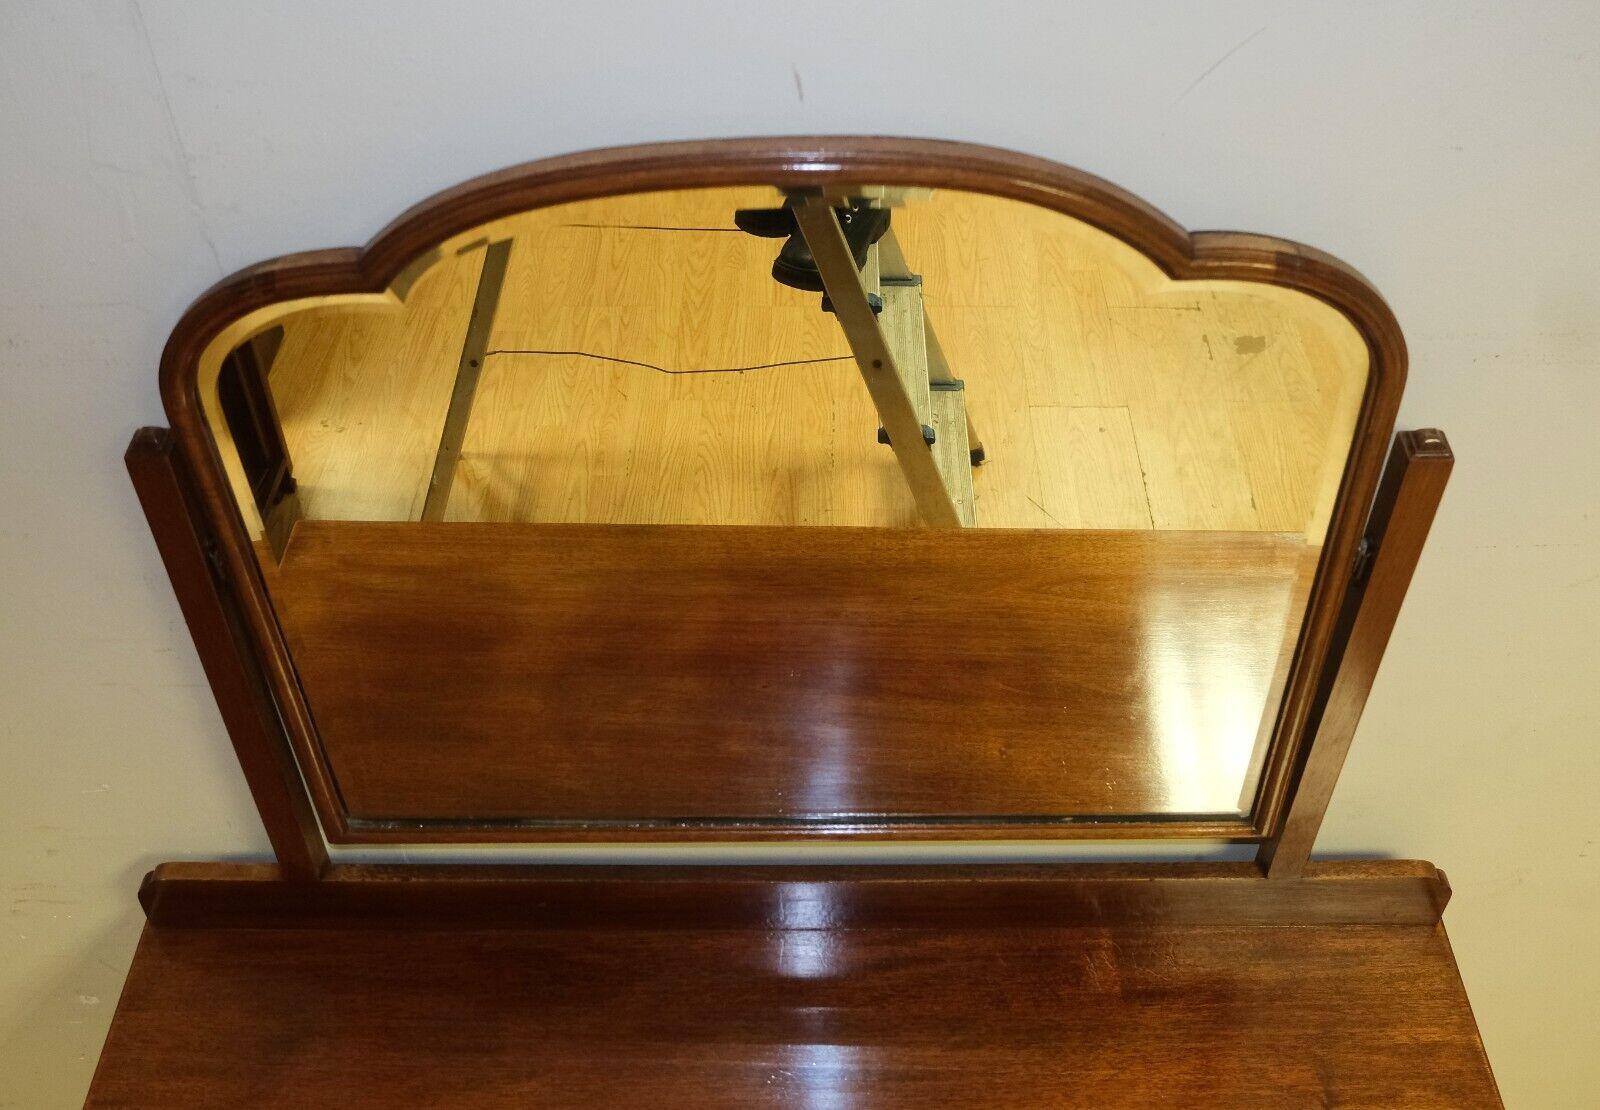 LOVELY EARLY 20TH CENTURY HARDWOOD DRESSiNG TABLE RAISED ON CABRIOLE LEGS (Spiegel) im Angebot